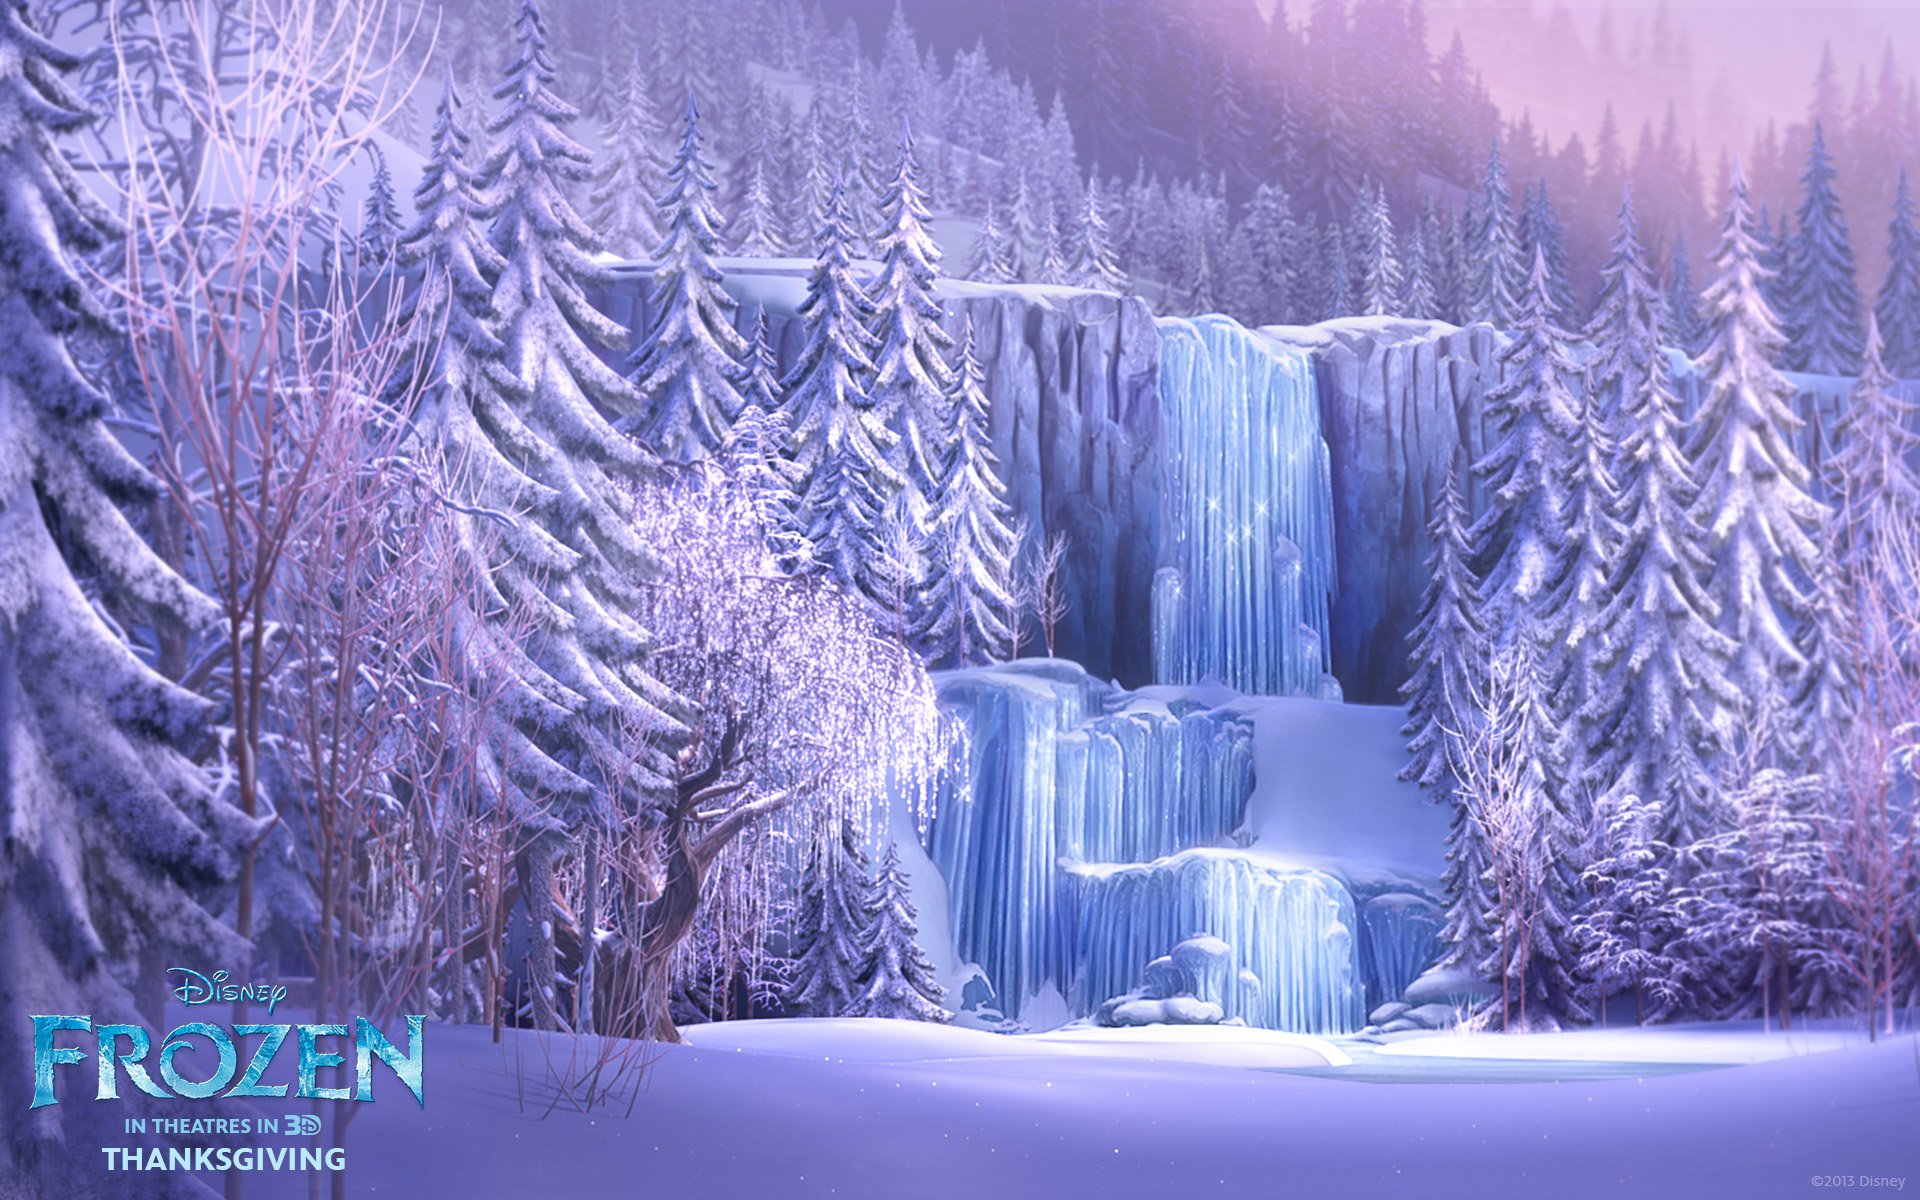 Frozen Waterfall from Disneys Frozen wallpaper   Click picture for